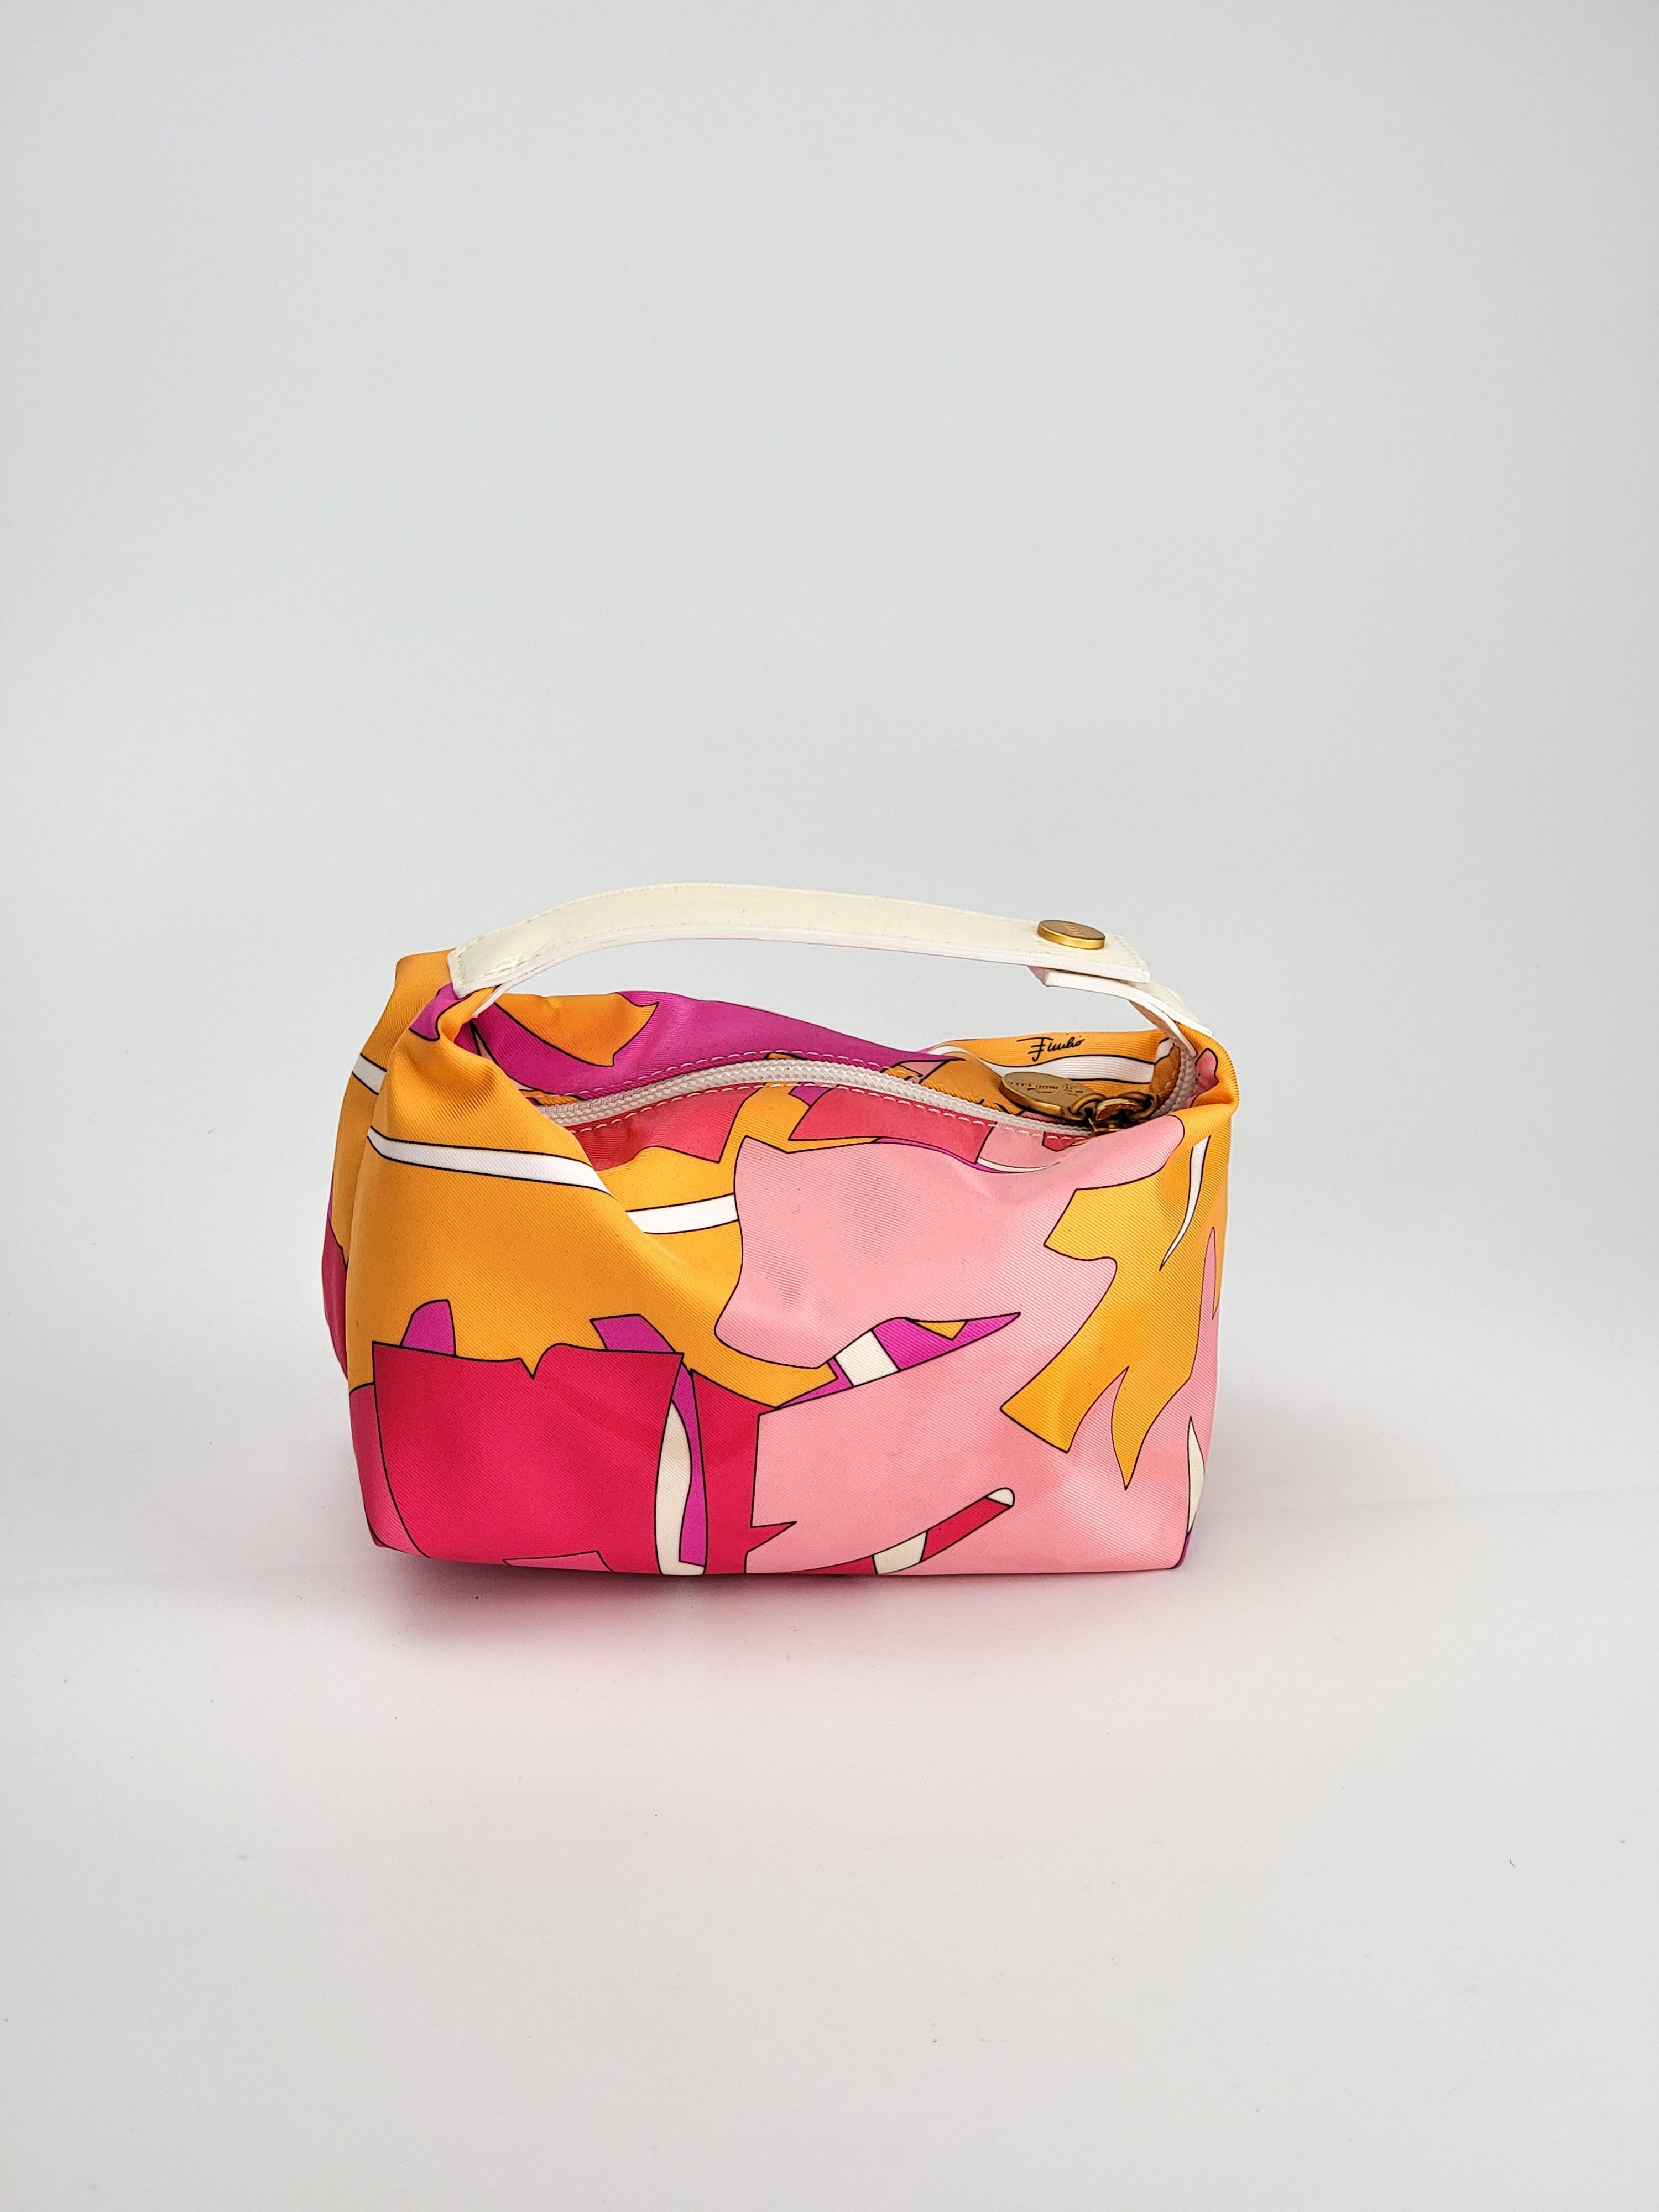 The most adorable Pucci bag :) This mini bag features gold tone hardware and an iconic Pucci abstract design in purples, pinks, yellow and white. Includes a white leather top handle with a gold tone snap closure signed 